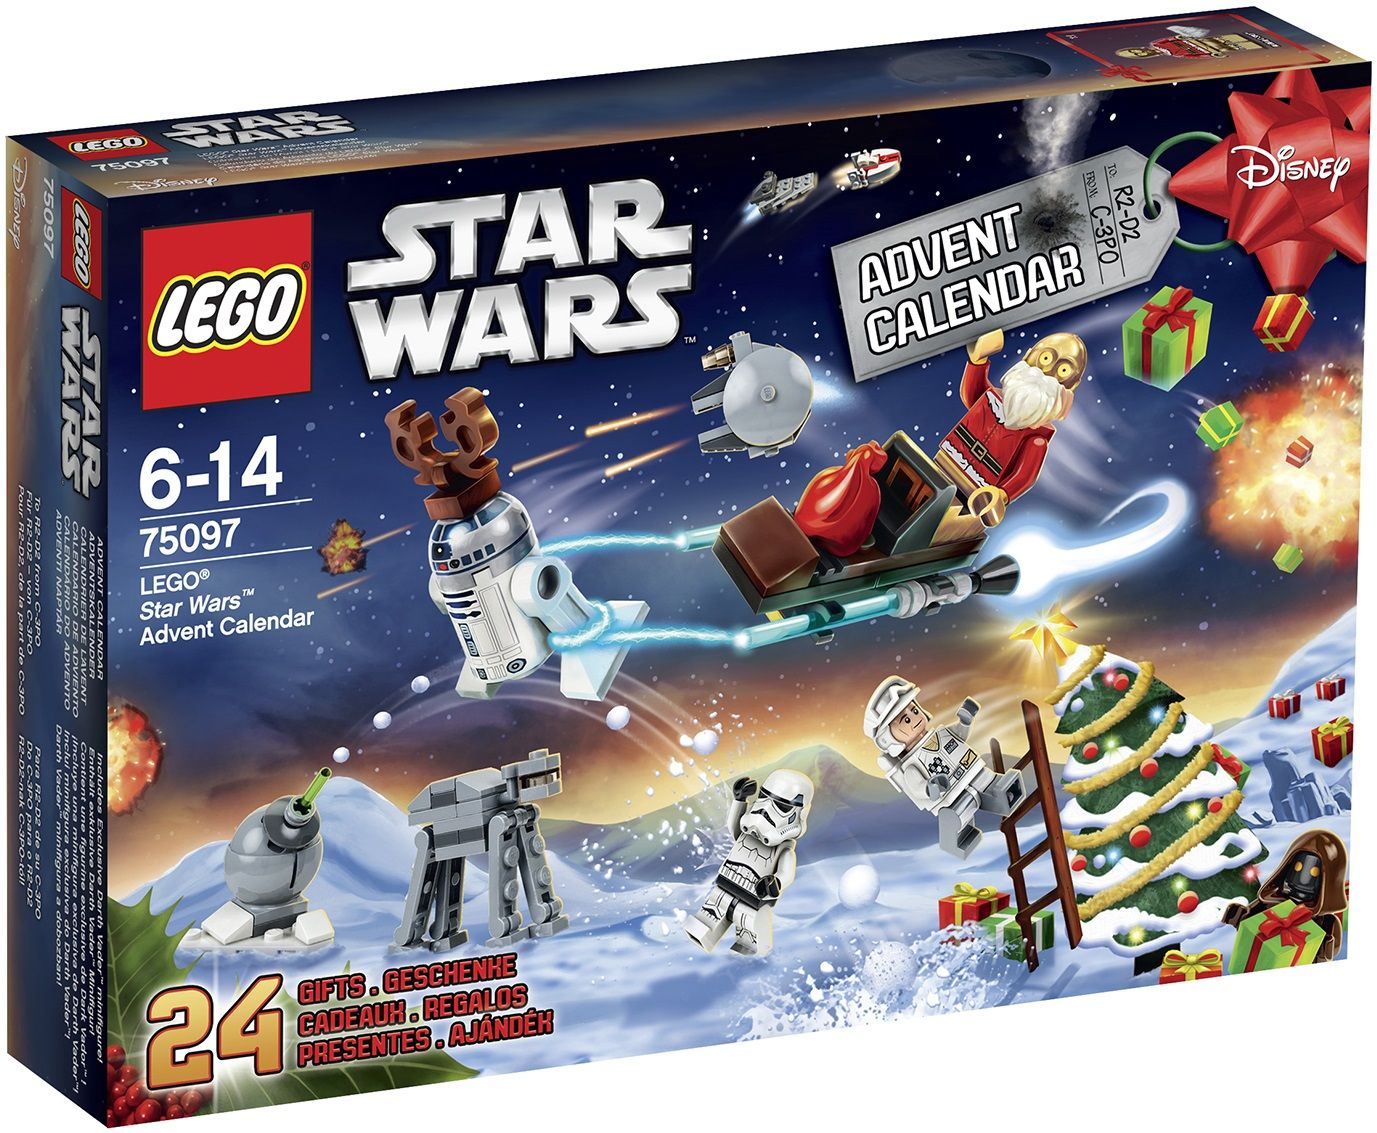 Lego Star Wars Advent Calendar is now available for sale Minifigure